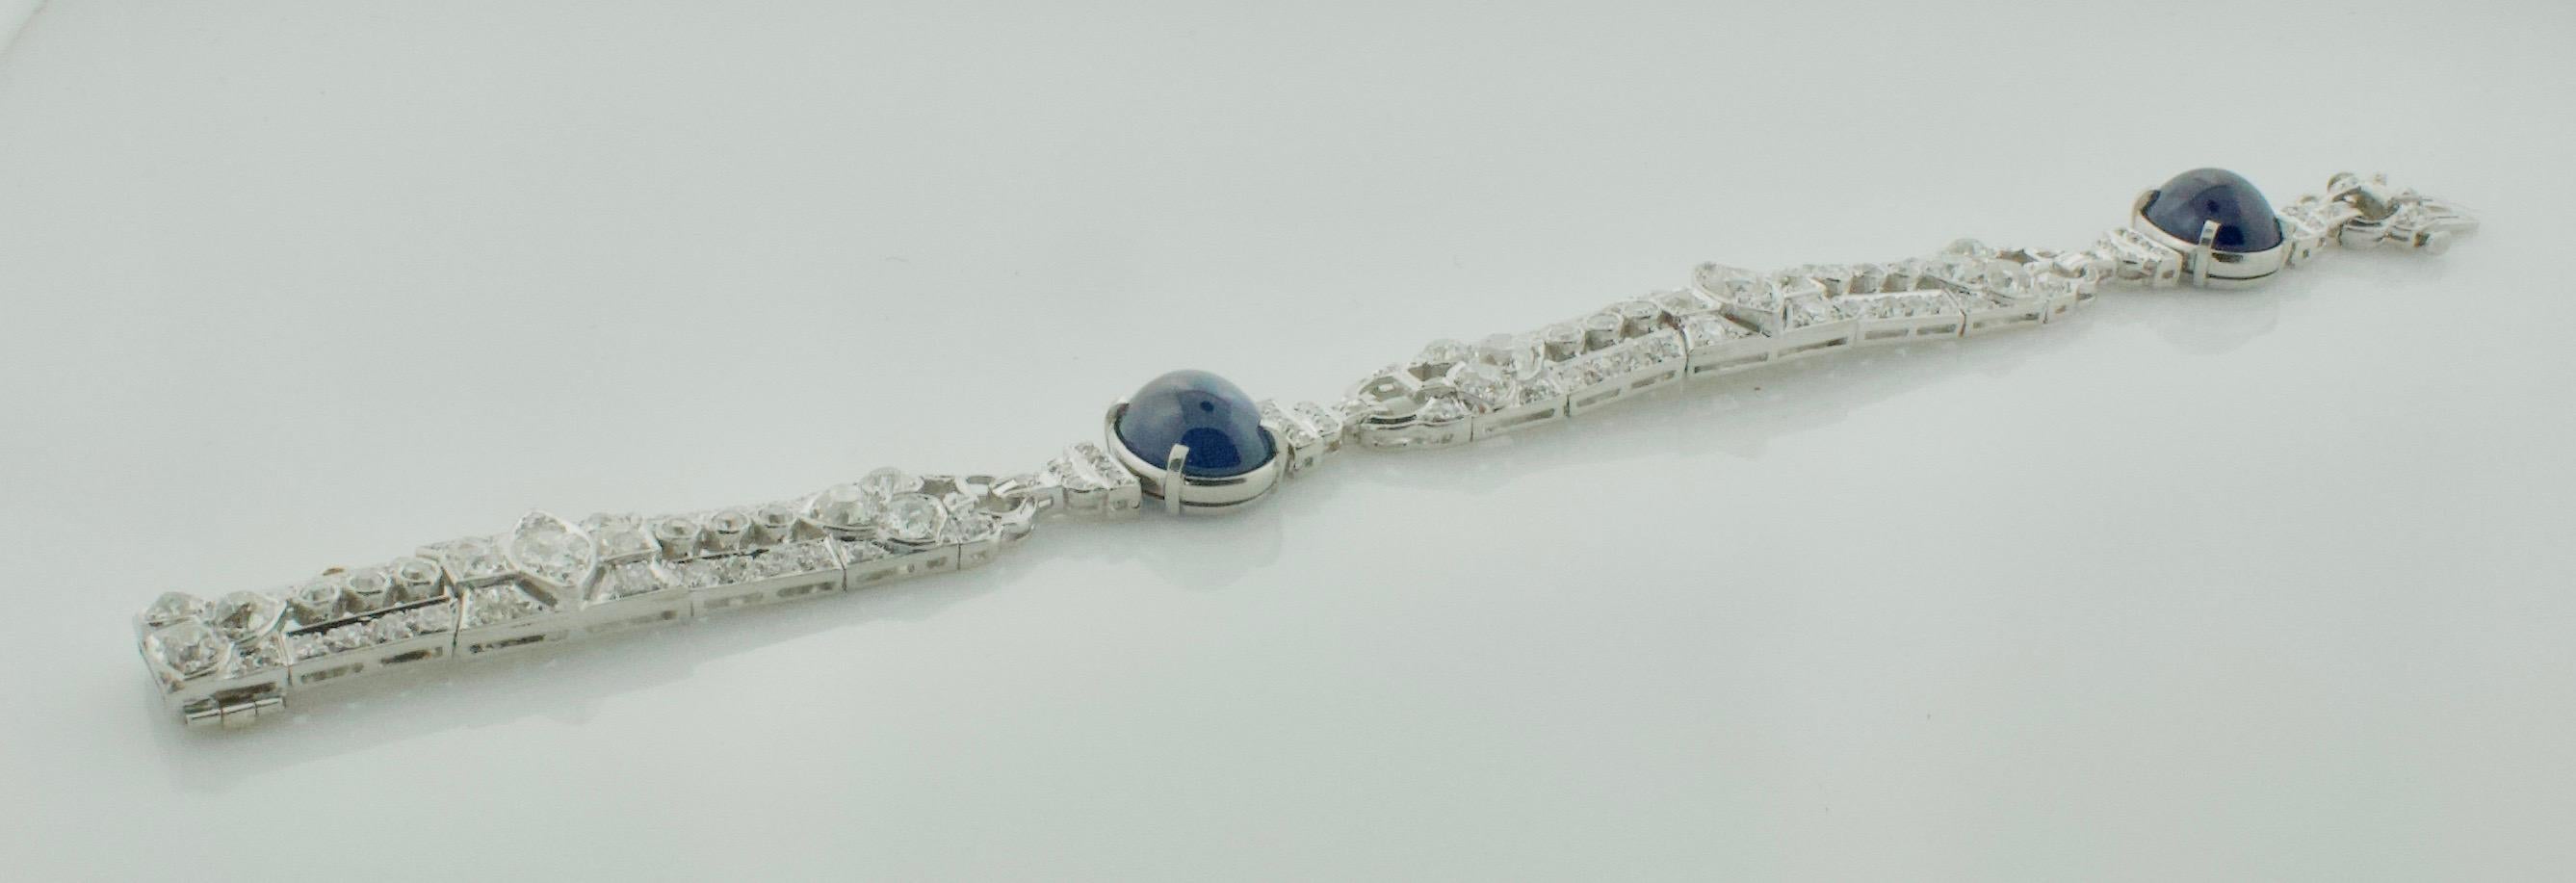 Art Deco Sapphire and Diamond Bracelet Adler & Co. Circa 1920's 18.85 Carats
Set in Platinum
Submitted For Your Approval 
From Adler & Company of New Orleans 
Two Cabochon Sapphires weighing 11.50 Carats approximately [bright with no imperfections